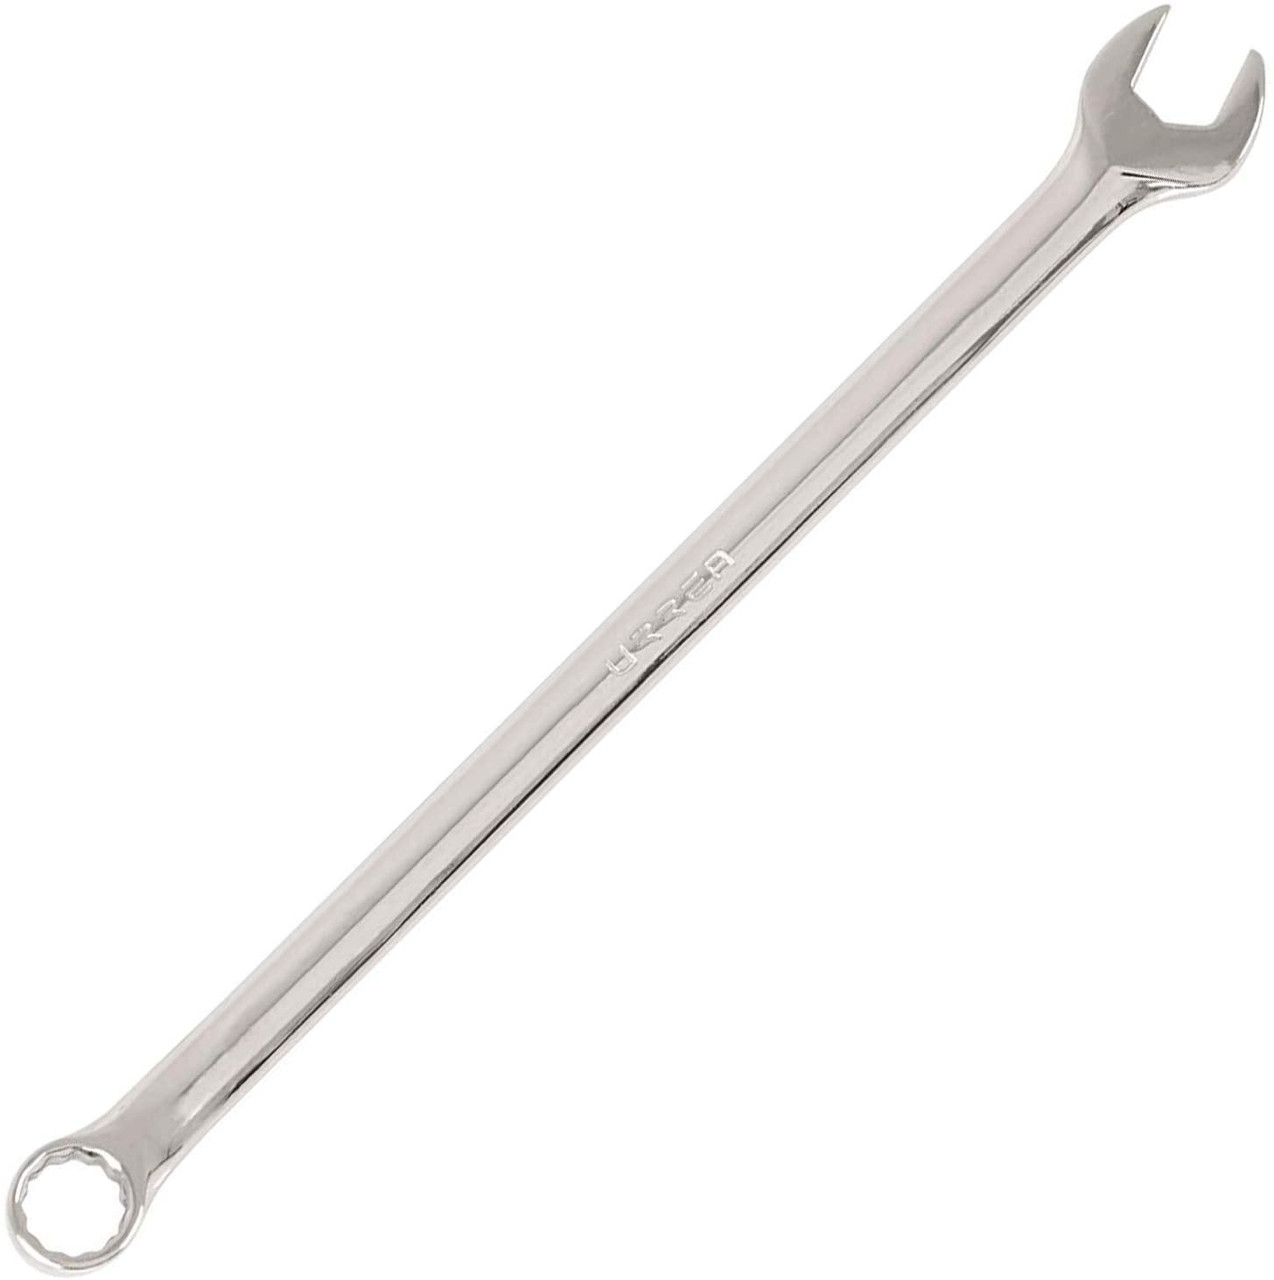 Full polished  Extra Long combination wrench, Size: 7/8, 12 point, Total Length: 15"